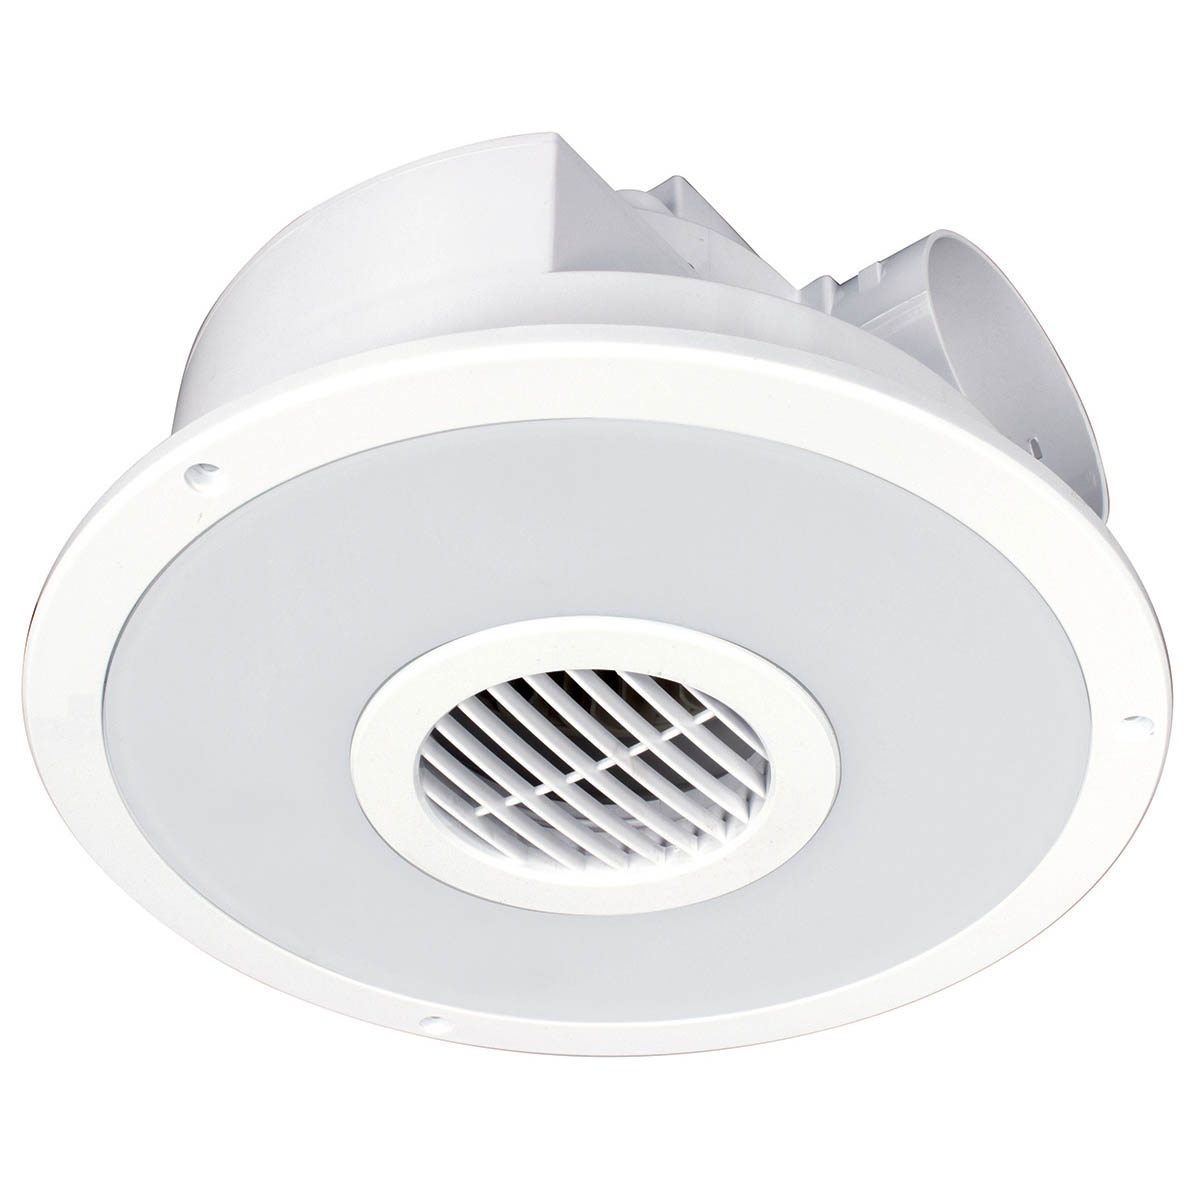 Round Exhaust Fan Photos And Products Ideas Bathroom Light throughout sizing 1200 X 1200